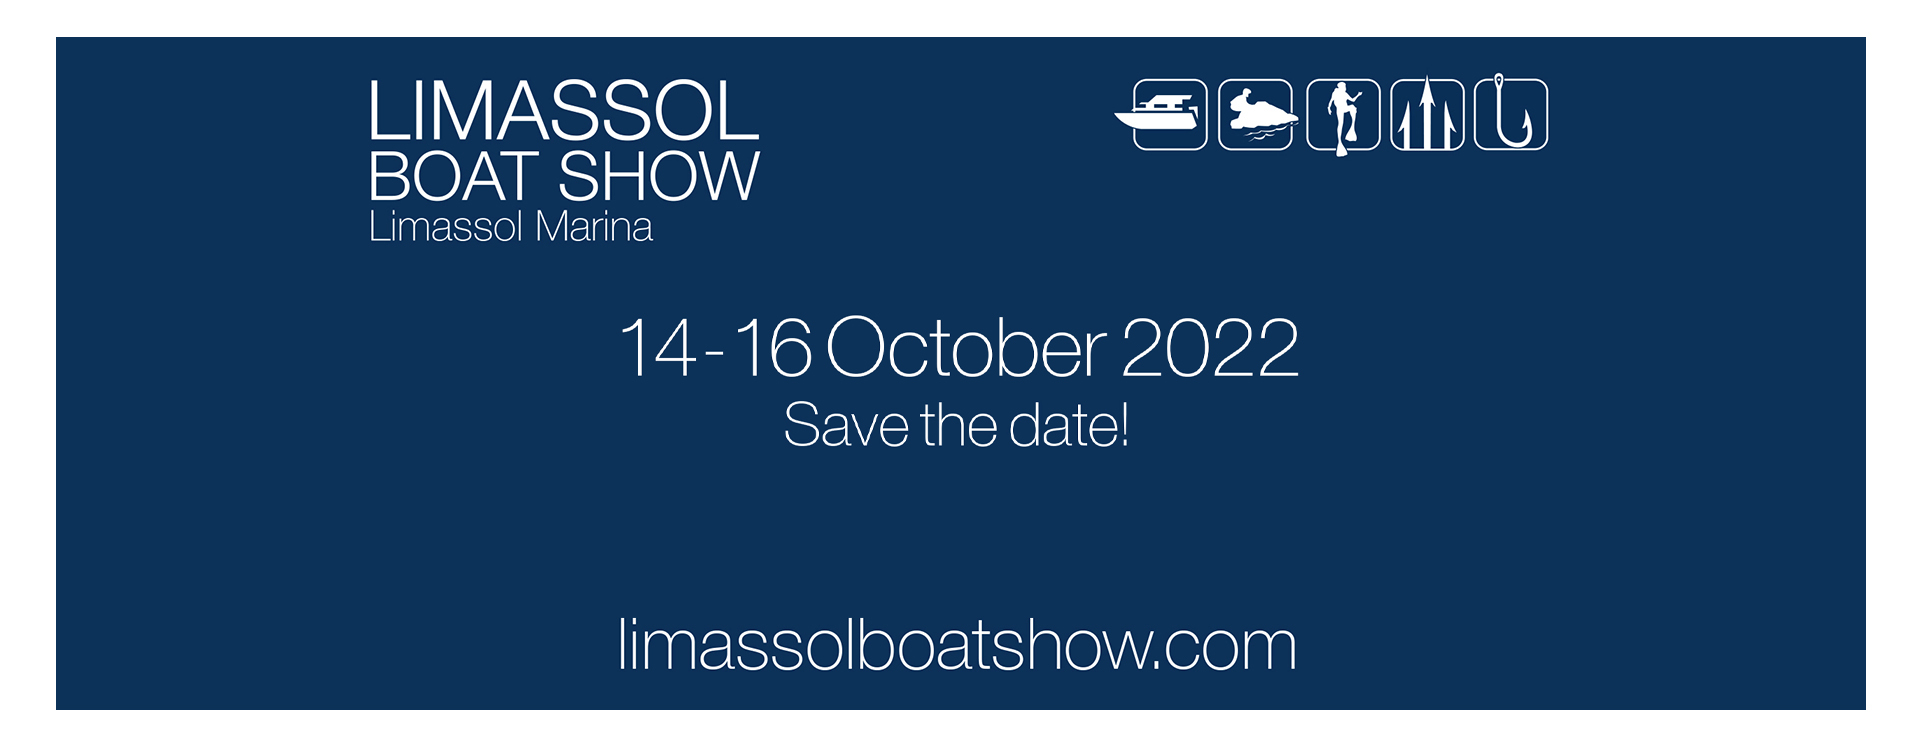 THE LIMASSOL BOAT SHOW IS BACK BIGGER AND BETTER